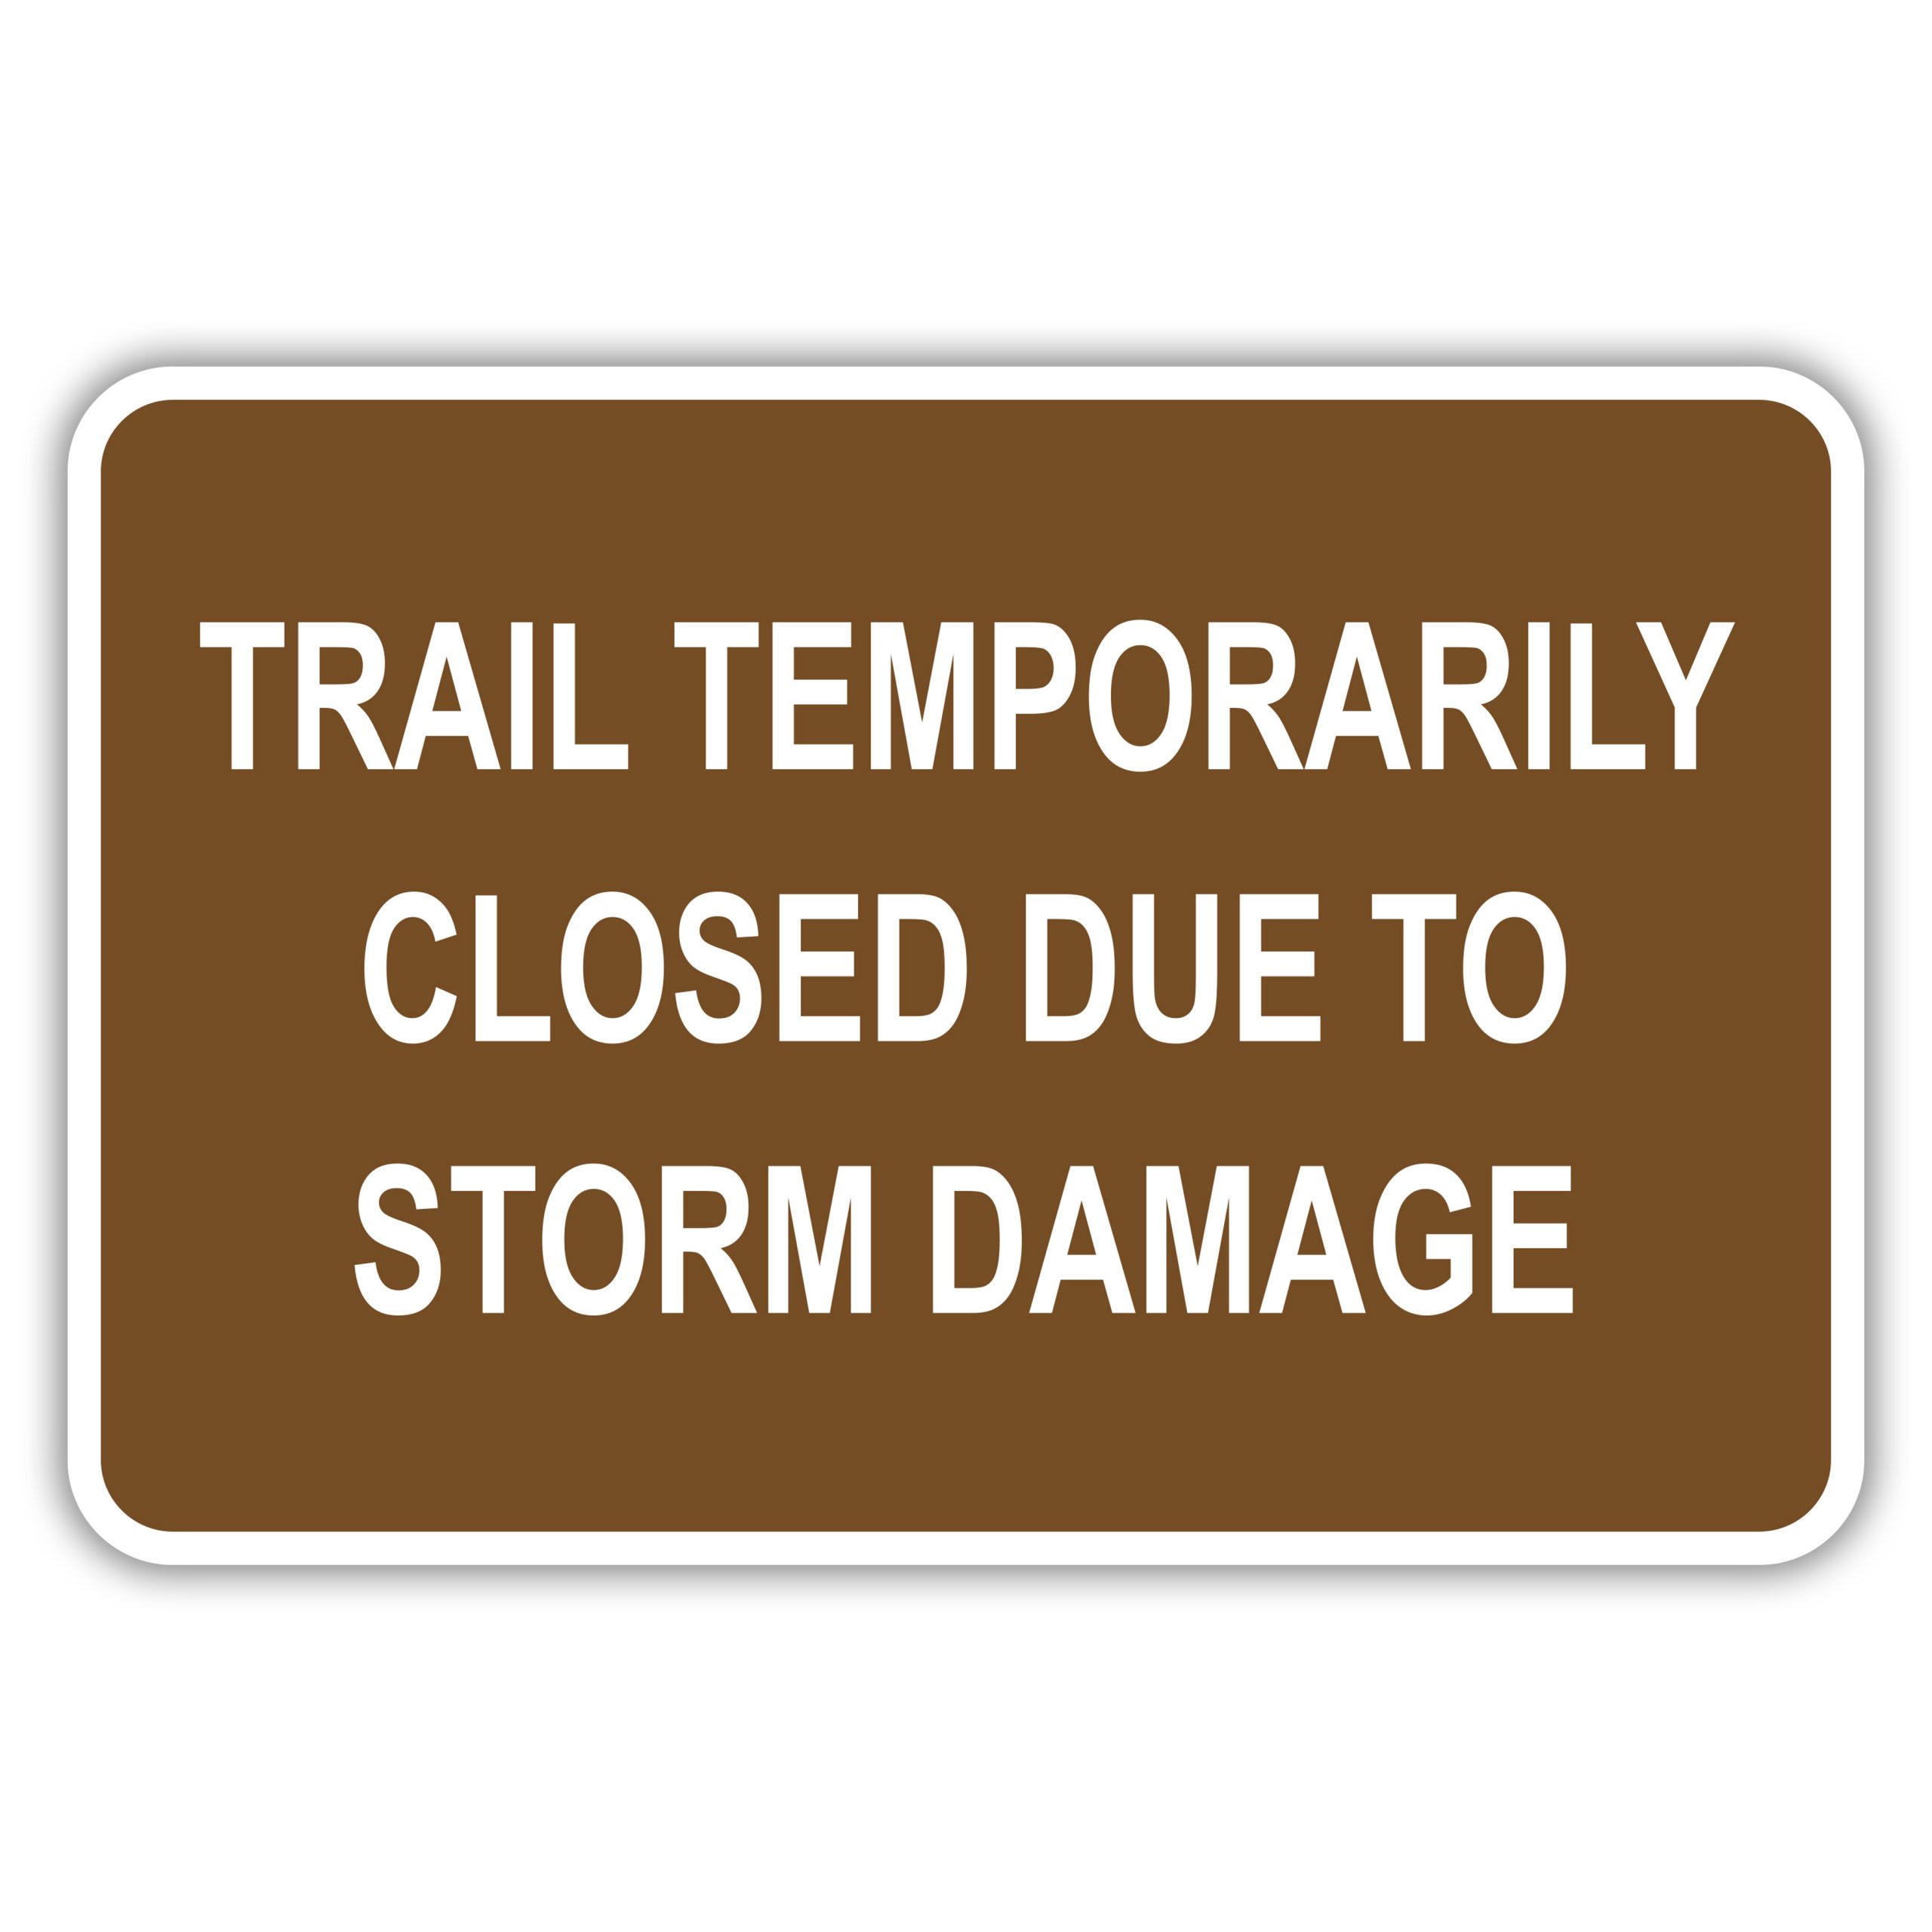 Recreation+areas+and+trails+at+Lake+Monroe+closed+due+to+storm+damage